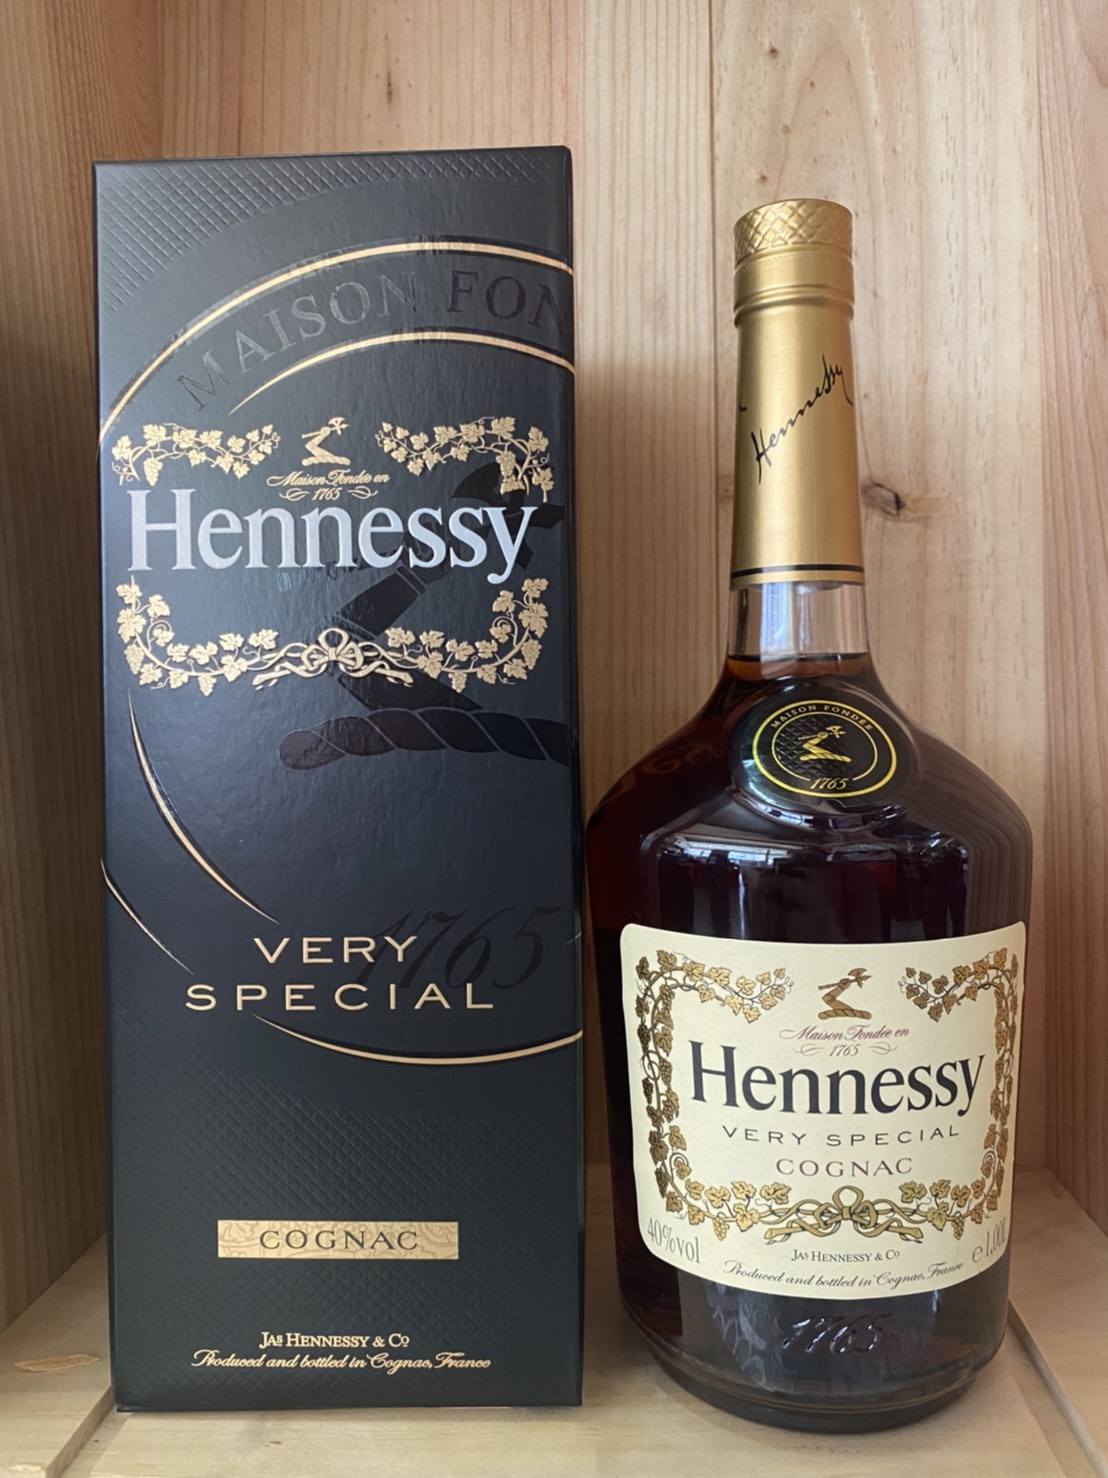 How Much Is A Bottle Of Hennessy Very Special Cognac